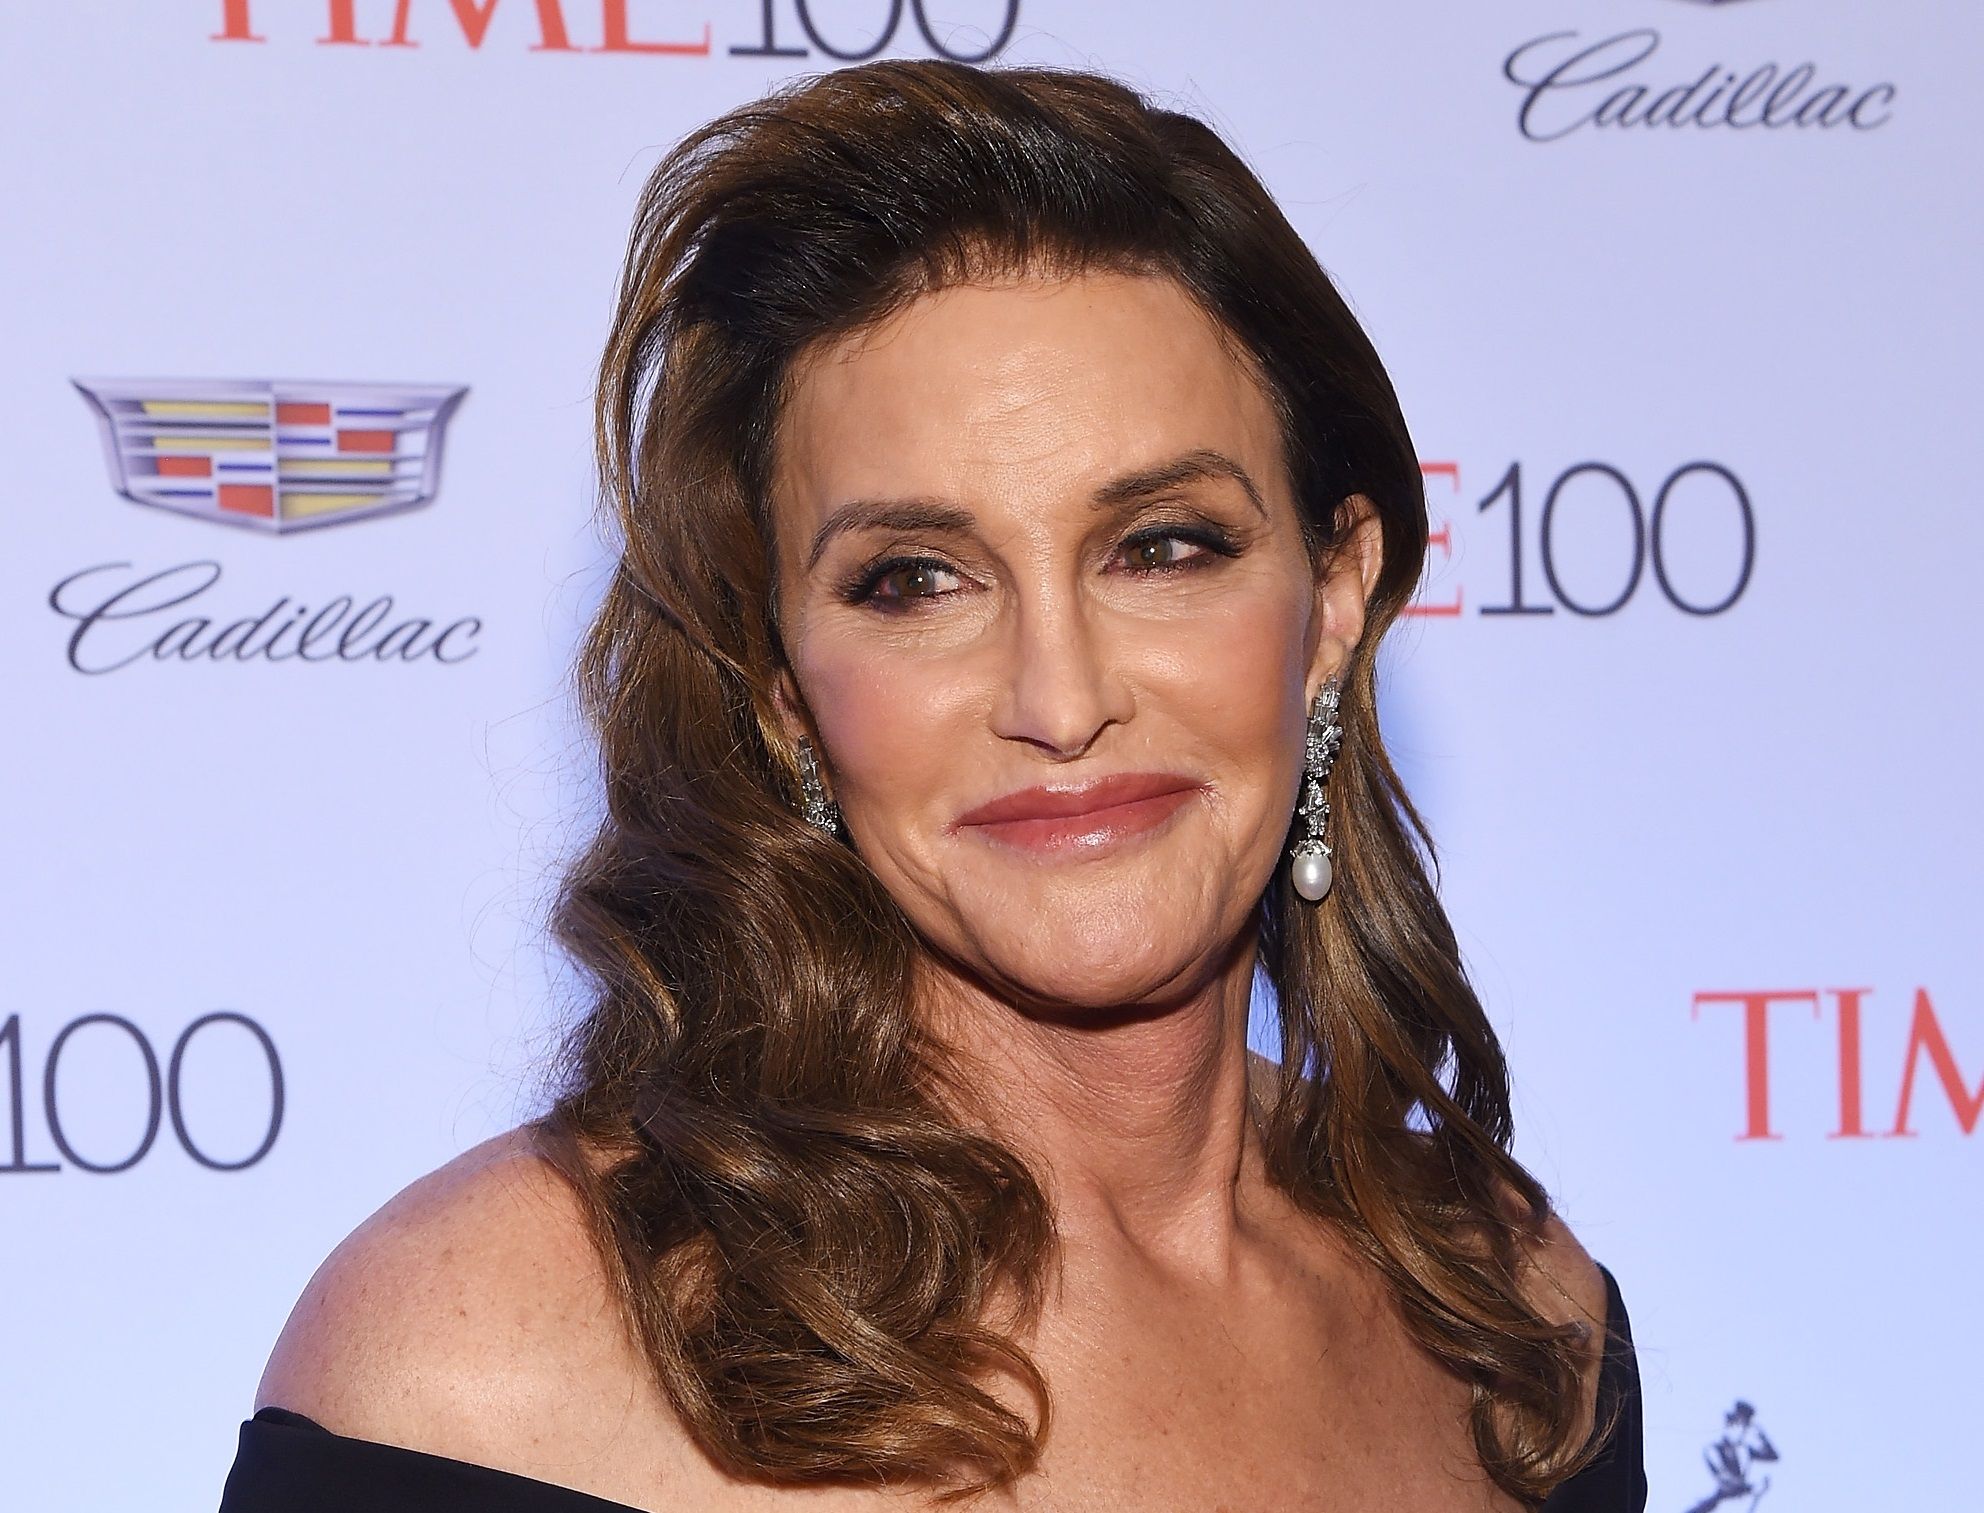 Caitlyn Jenner Regrets Transitioning To A Woman, Wants To Bruce